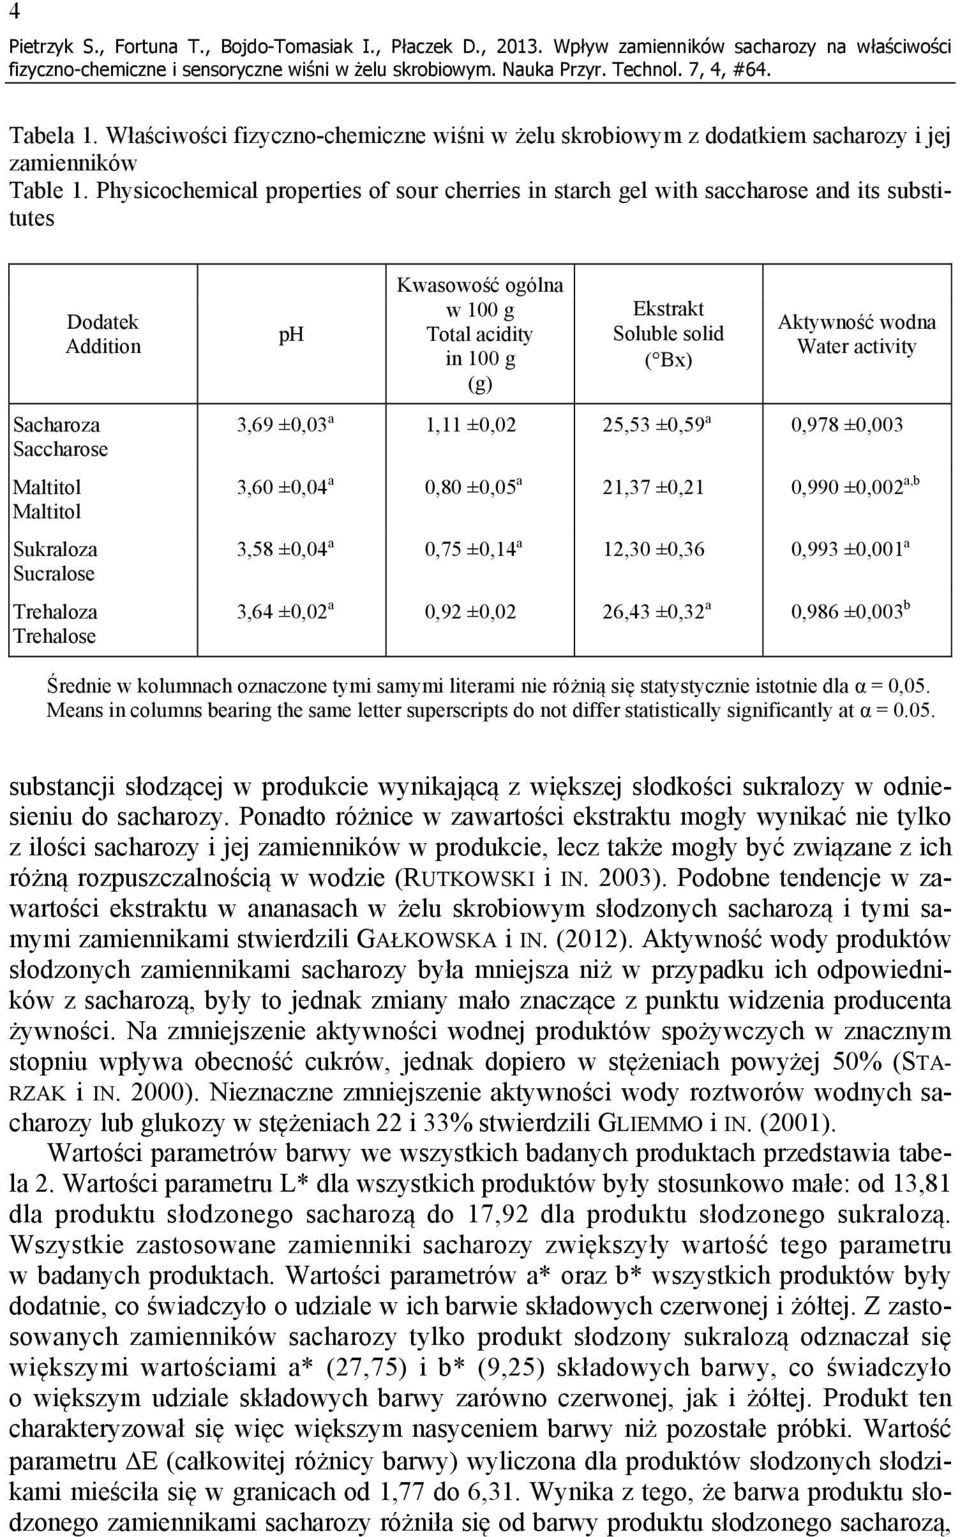 Physicochemical properties of sour cherries in starch gel with saccharose and its substitutes Dodatek Addition ph Kwasowość ogólna w 100 g Total acidity in 100 g (g) Ekstrakt Soluble solid ( Bx)